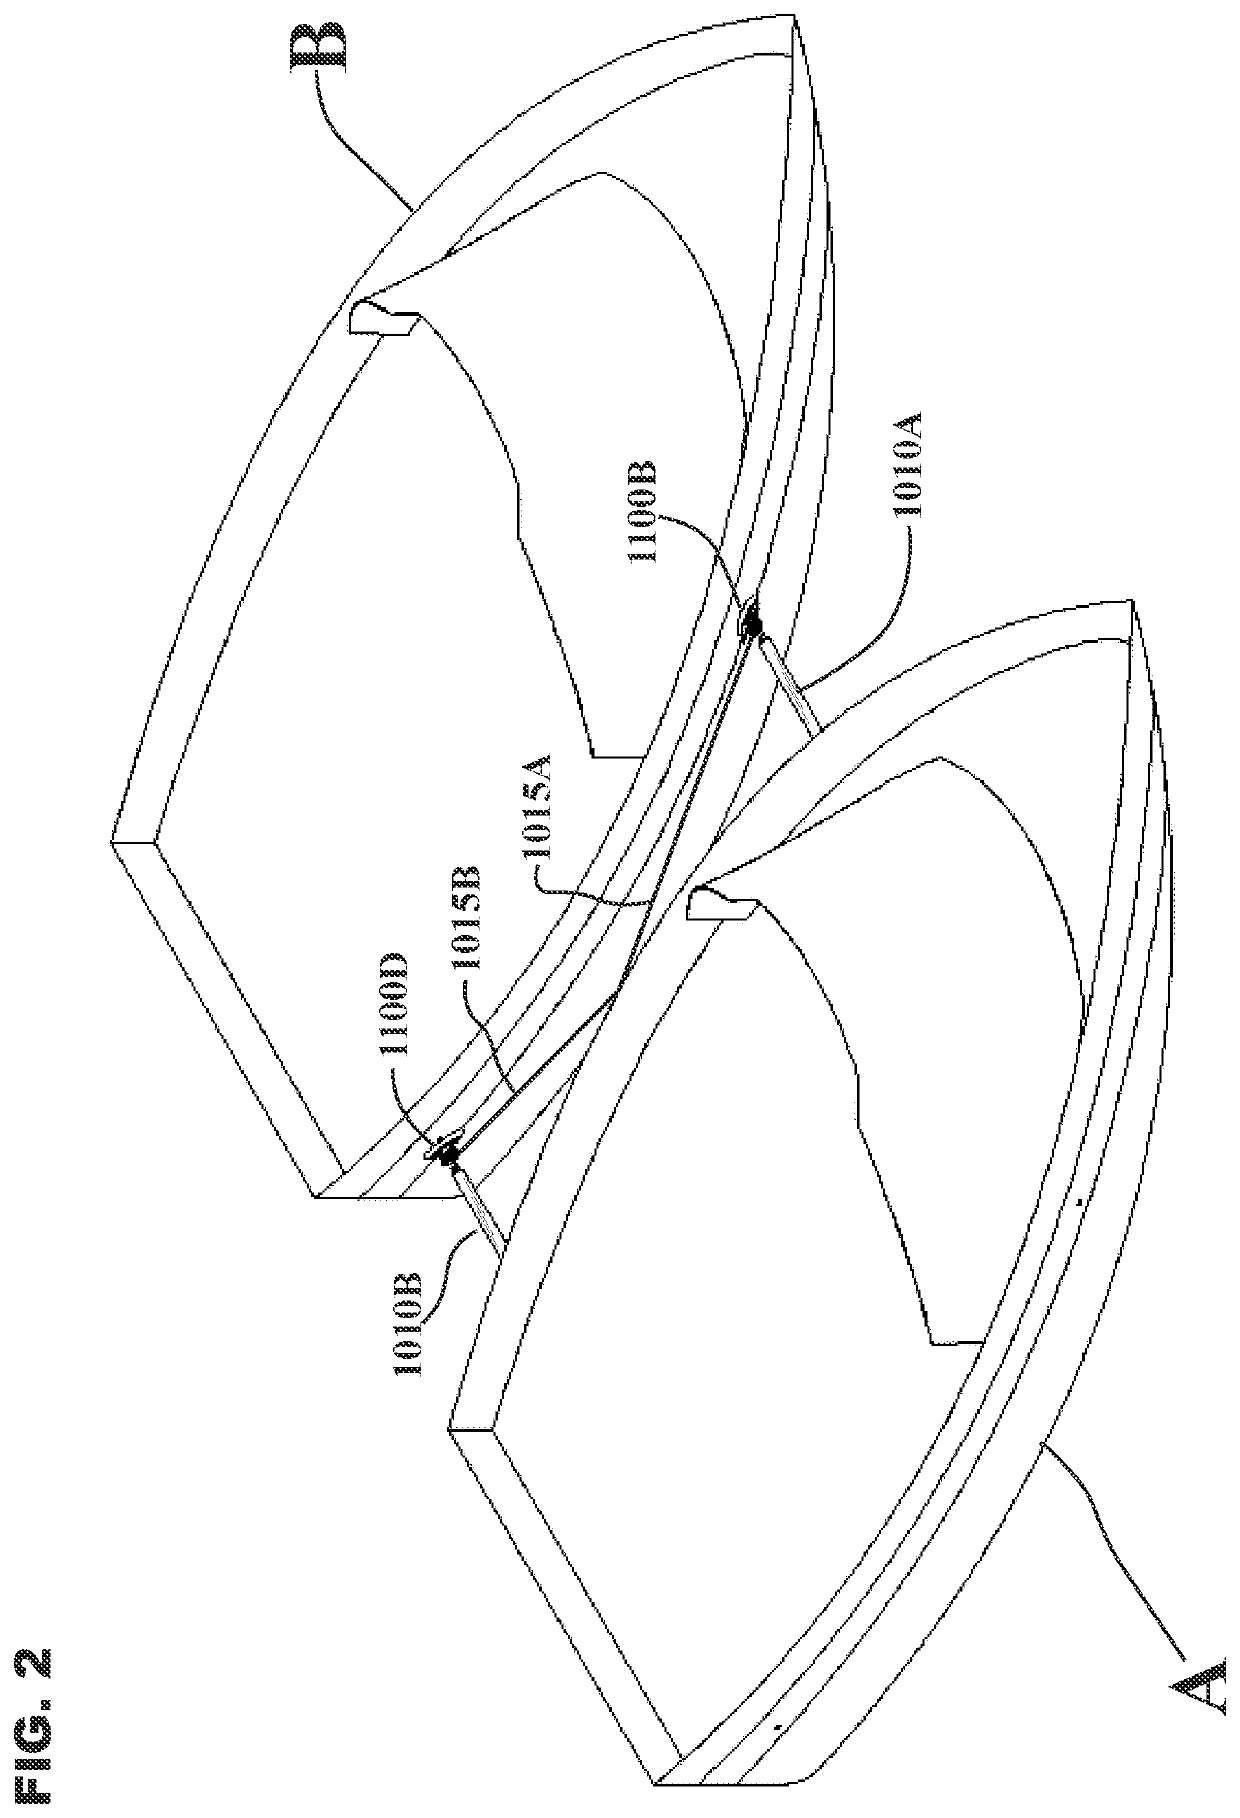 Mooring device and methods of use